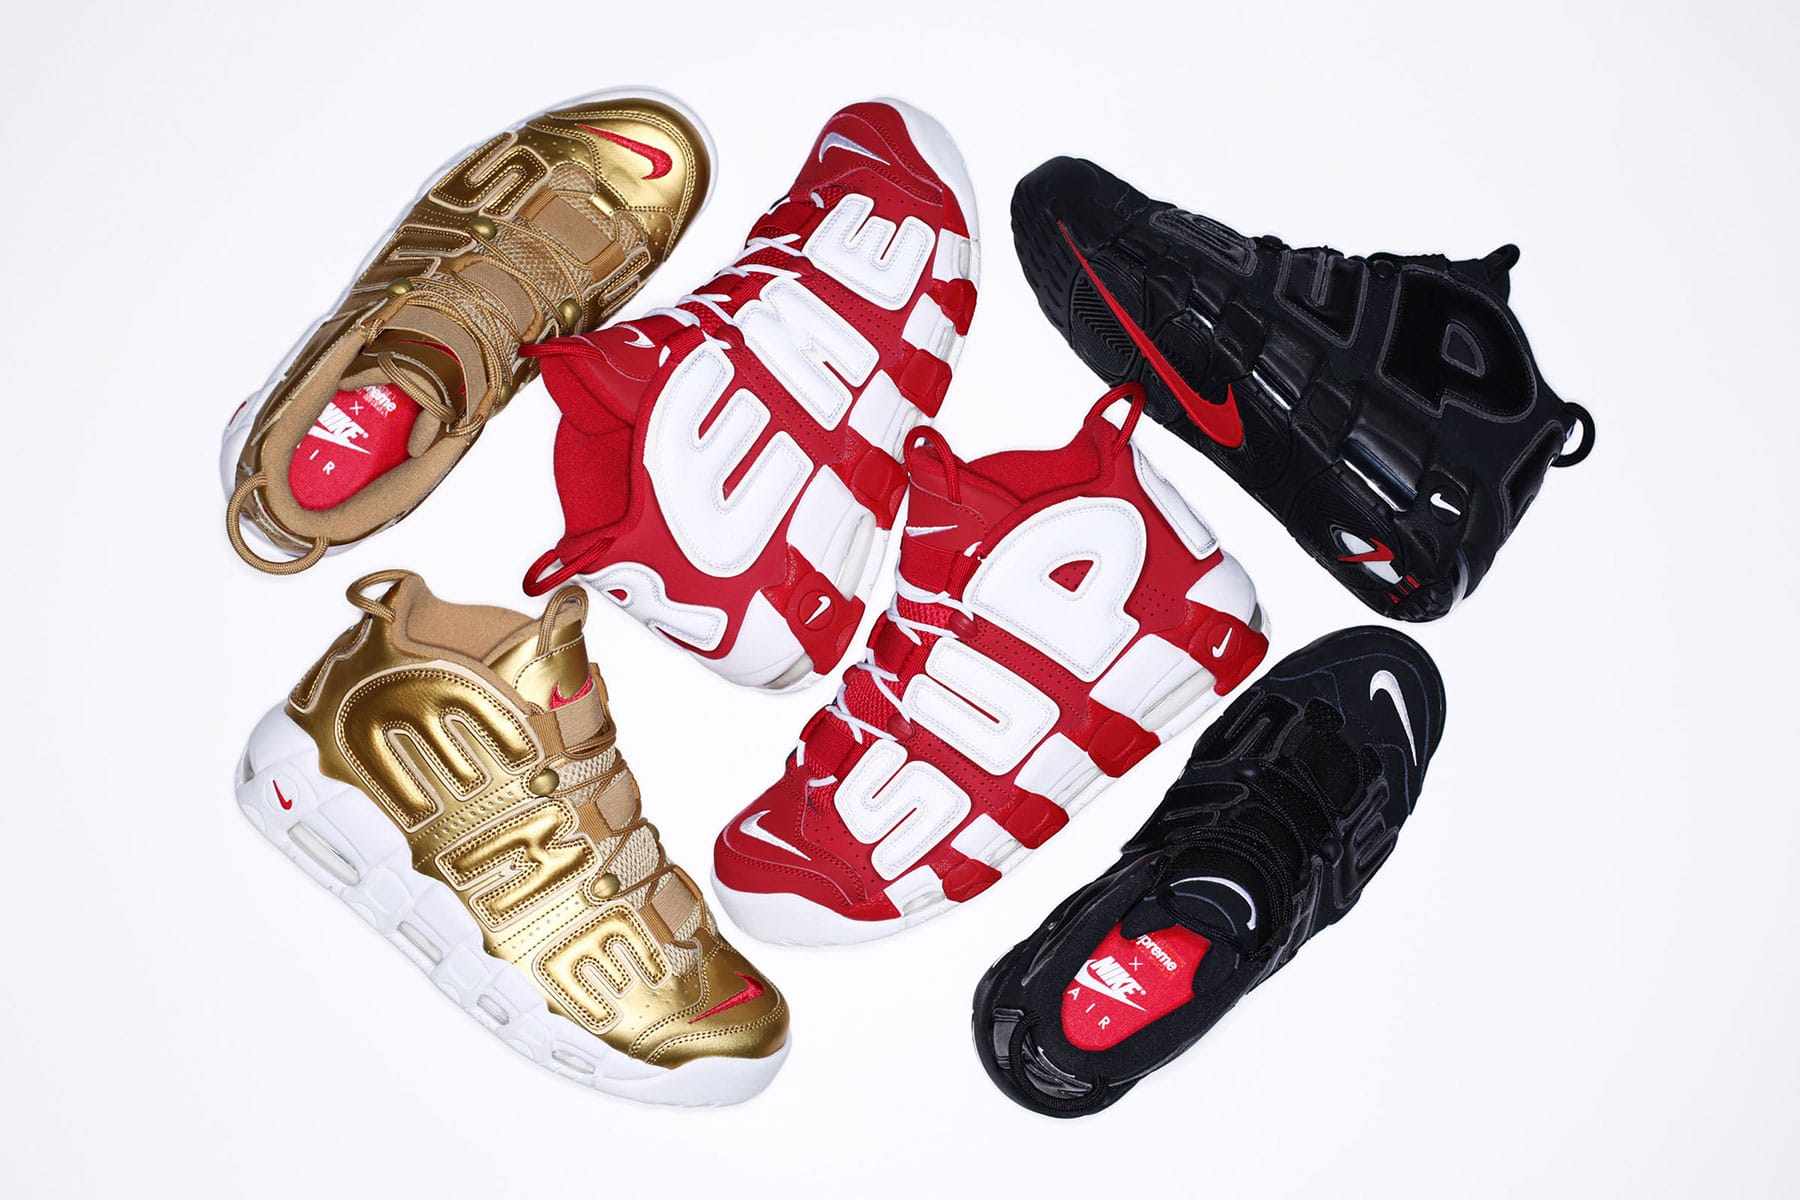 supreme air uptempo red